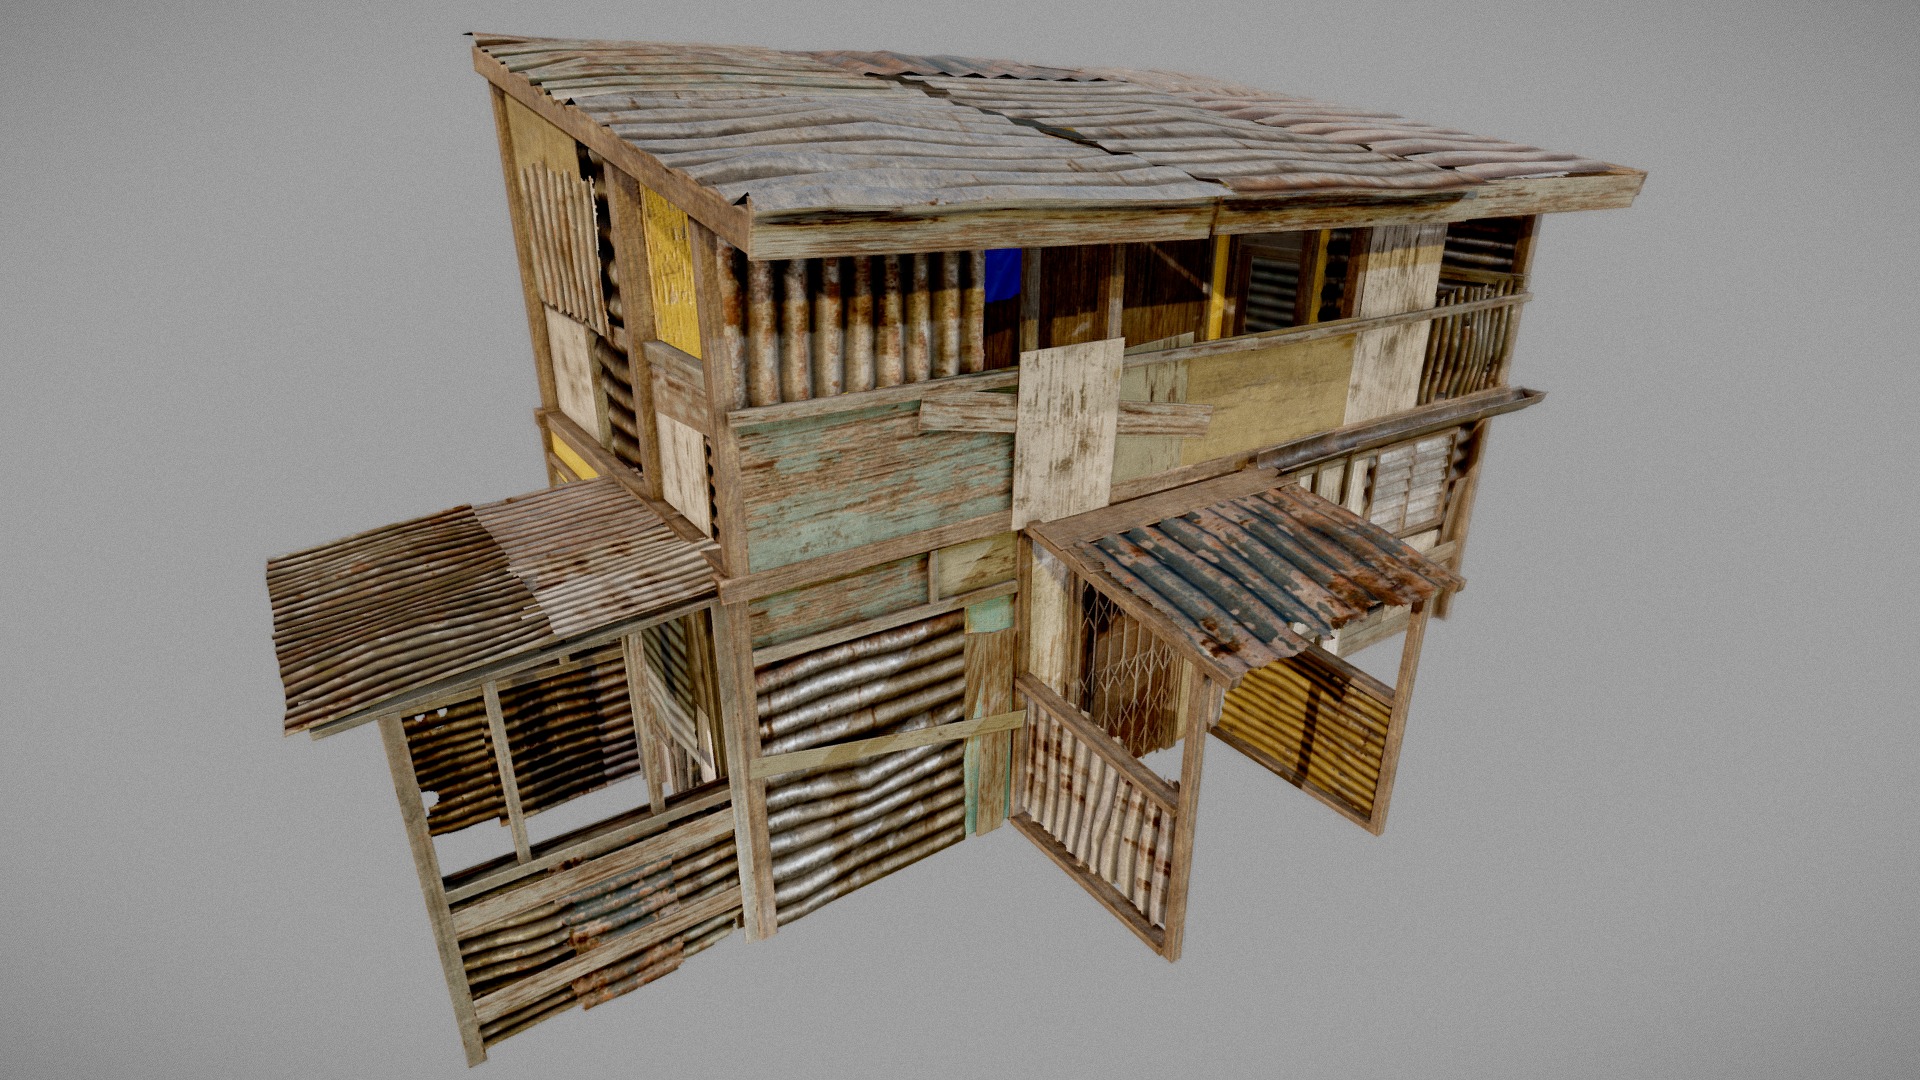 3D model Squatter House 01 – PBR - This is a 3D model of the Squatter House 01 - PBR. The 3D model is about a wooden birdhouse with a birdhouse.